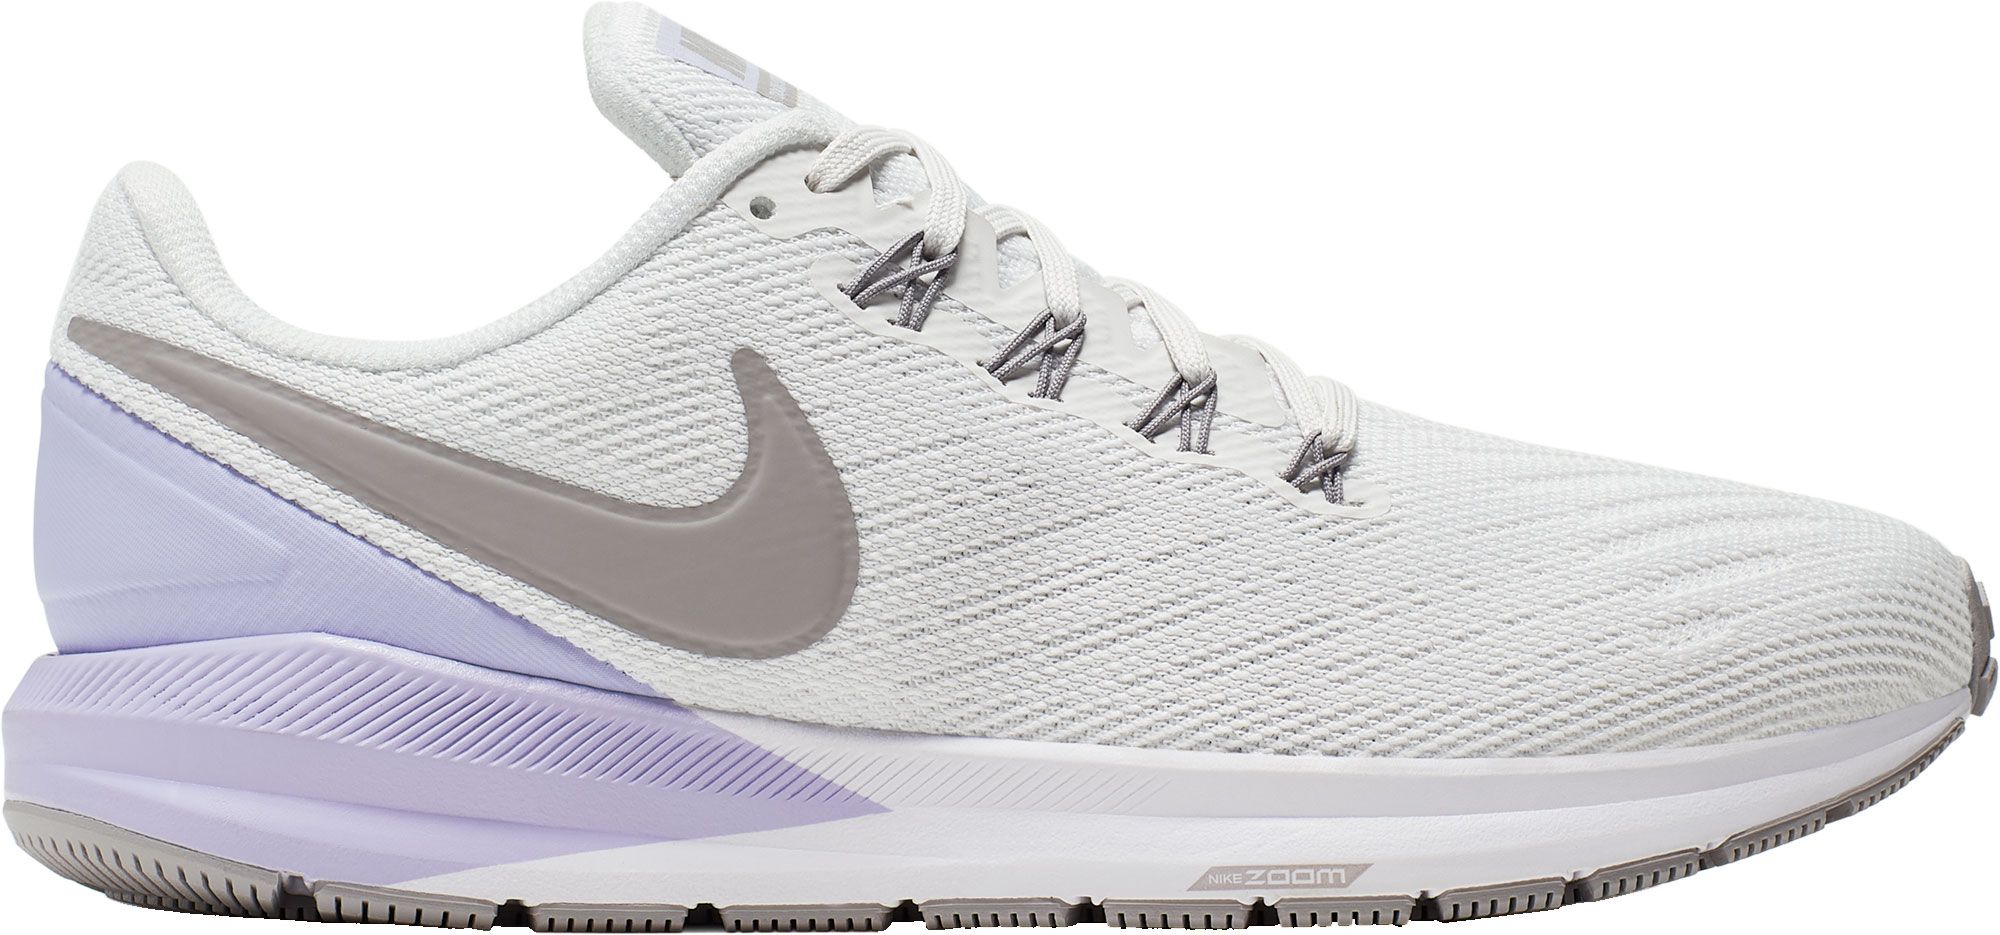 nike women's air zoom structure 22